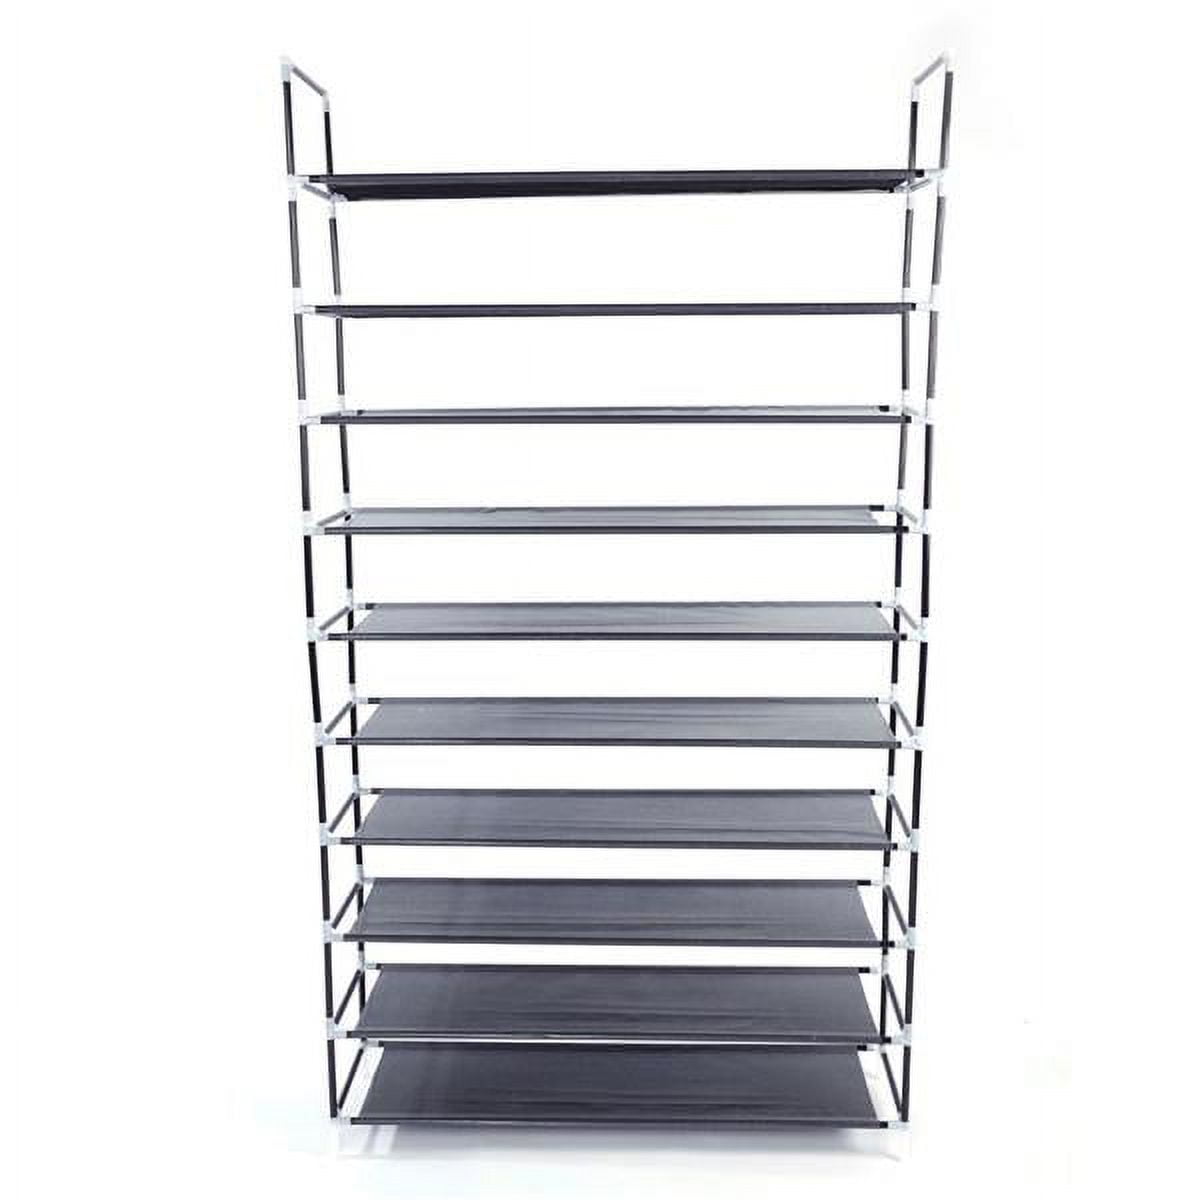 ZILJJ Stackable Shoe Rack, 10 Tiers Tall Metal Shoe Rack for Entryway and  Closet, Space Saving Narrow Shoe Shelf Organzier Storage for 20-24 Pairs